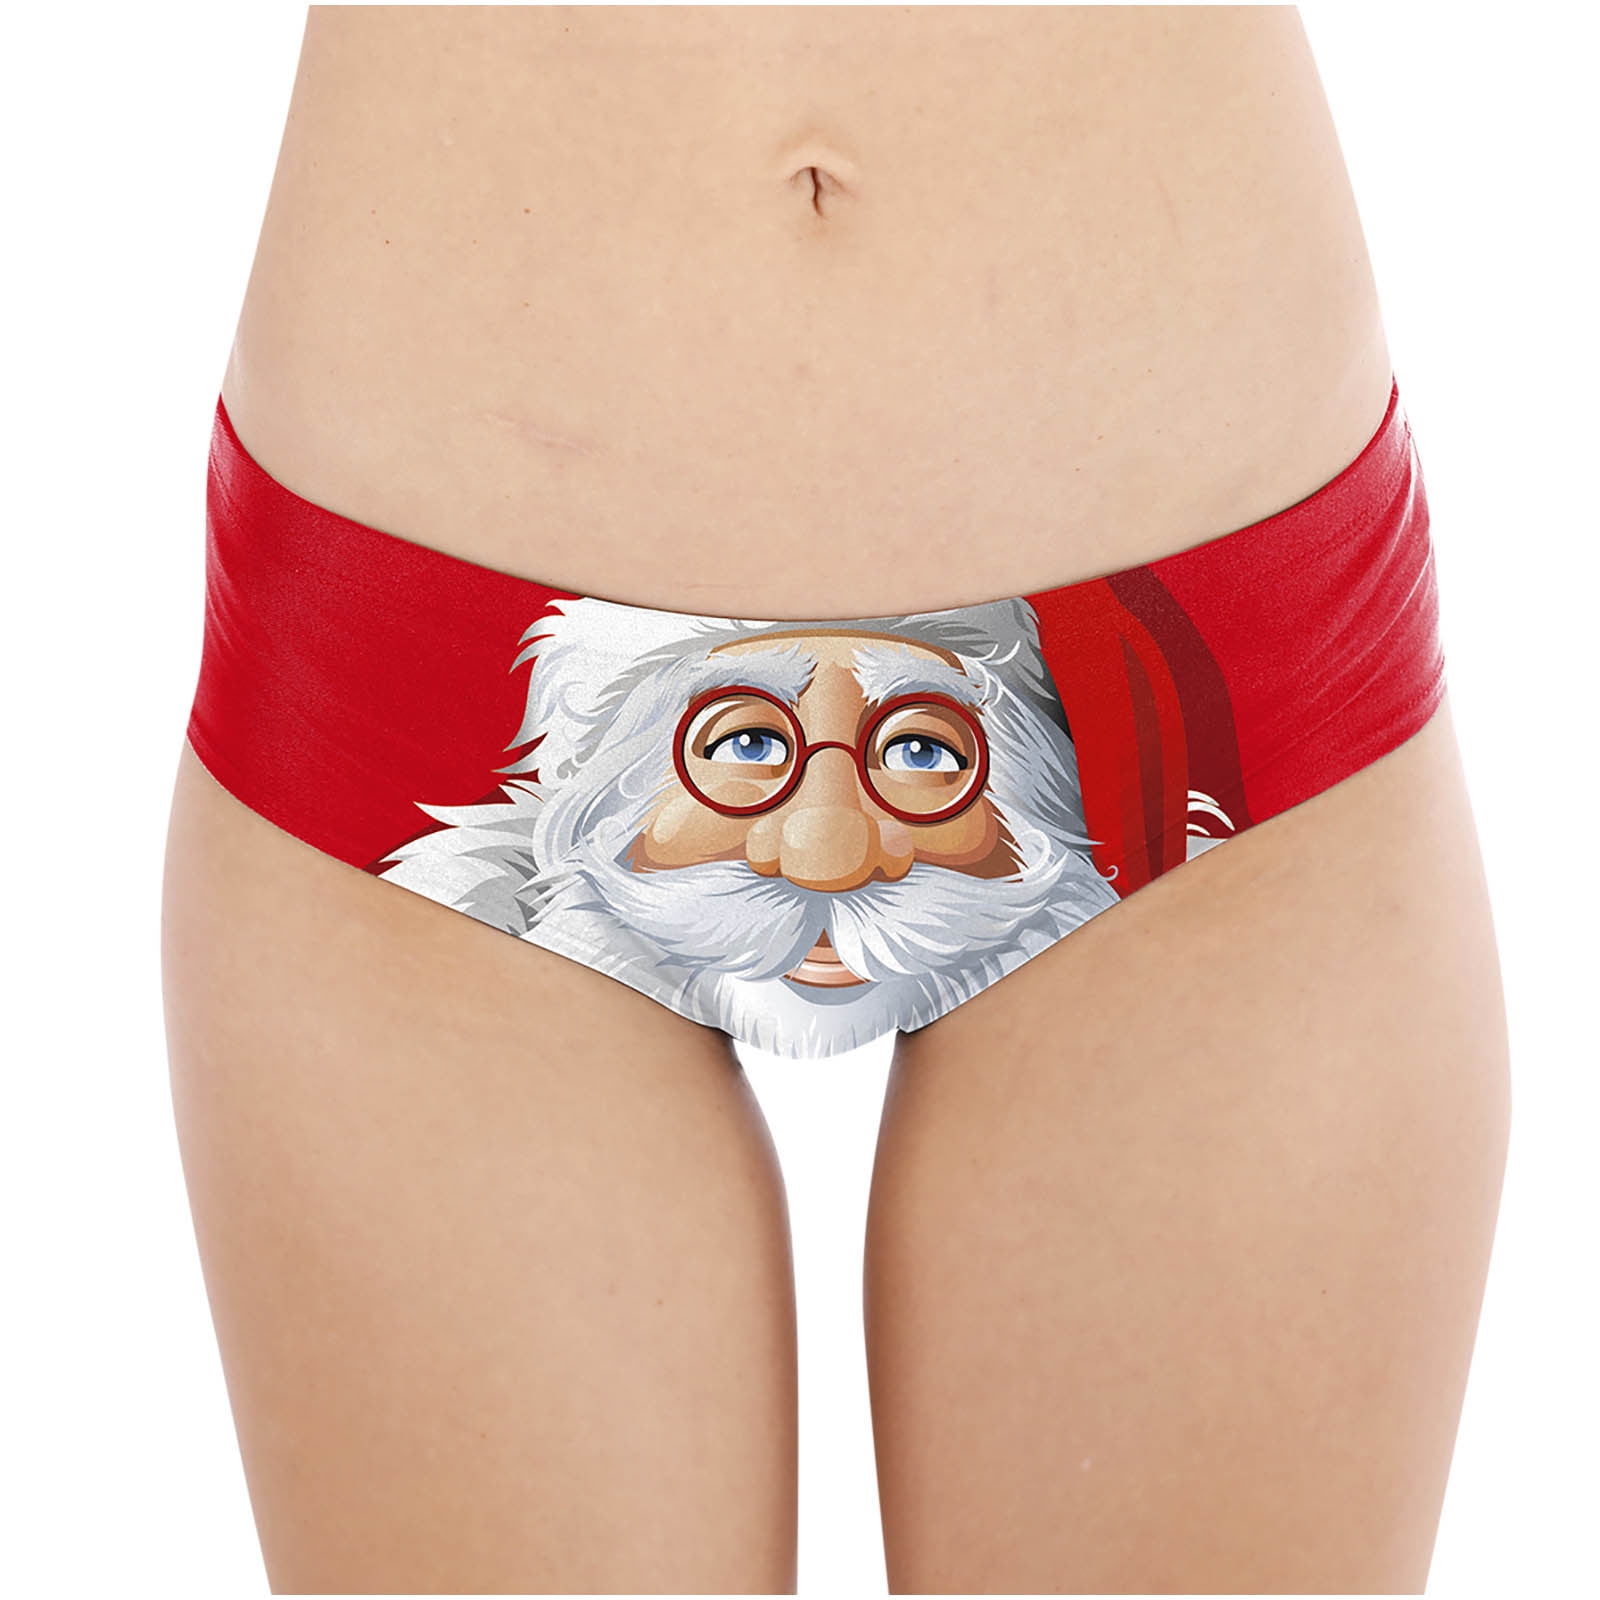 Womens Underwear Low Rise Xmas Lingerie Funny Printed Briefs